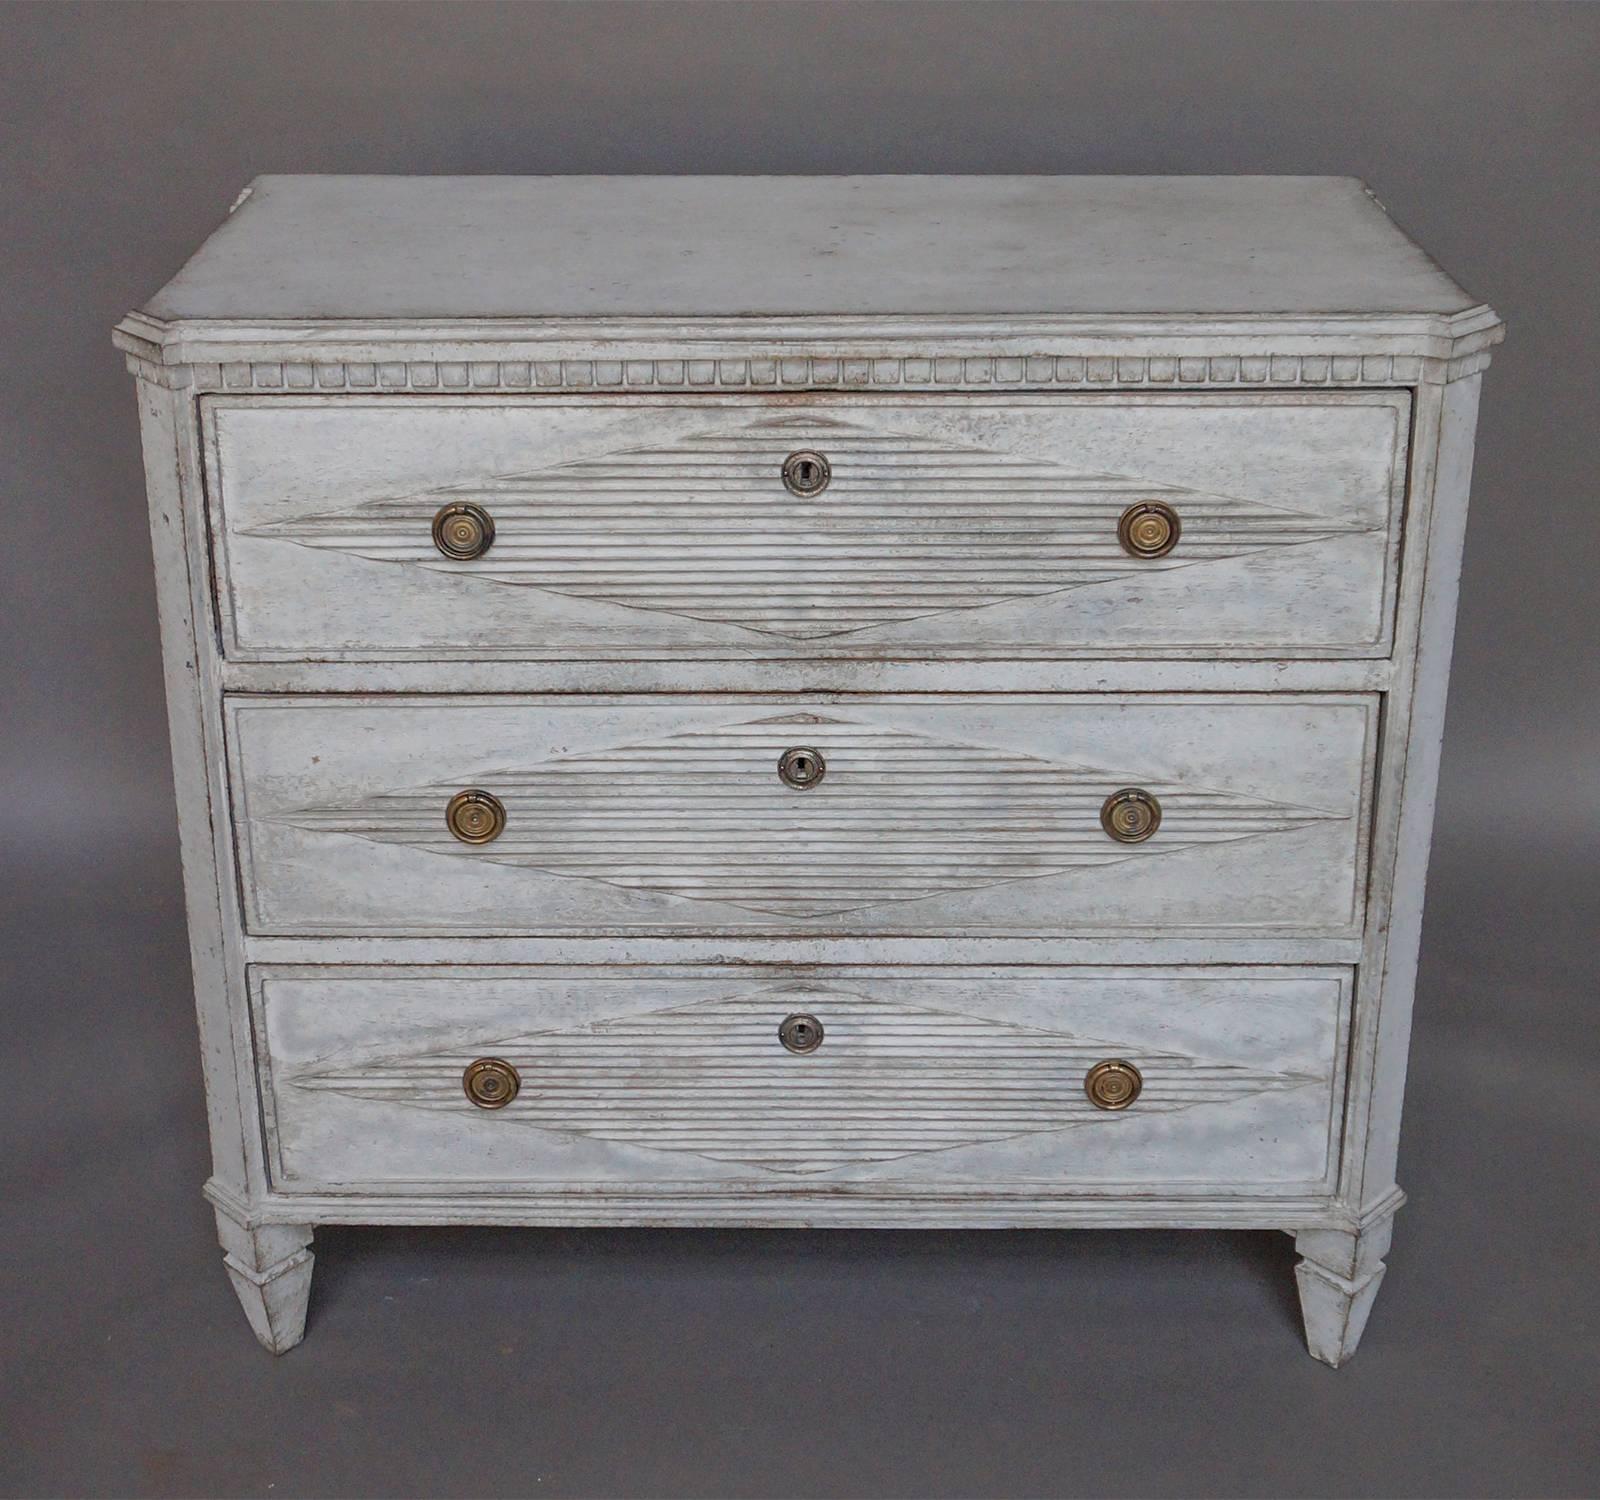 Swedish chest of drawers in the Gustavian style, circa 1850. Three drawers, each with a raised and reeded lozenge and brass hardware. Shaped top, dentil molding, and canted corners.